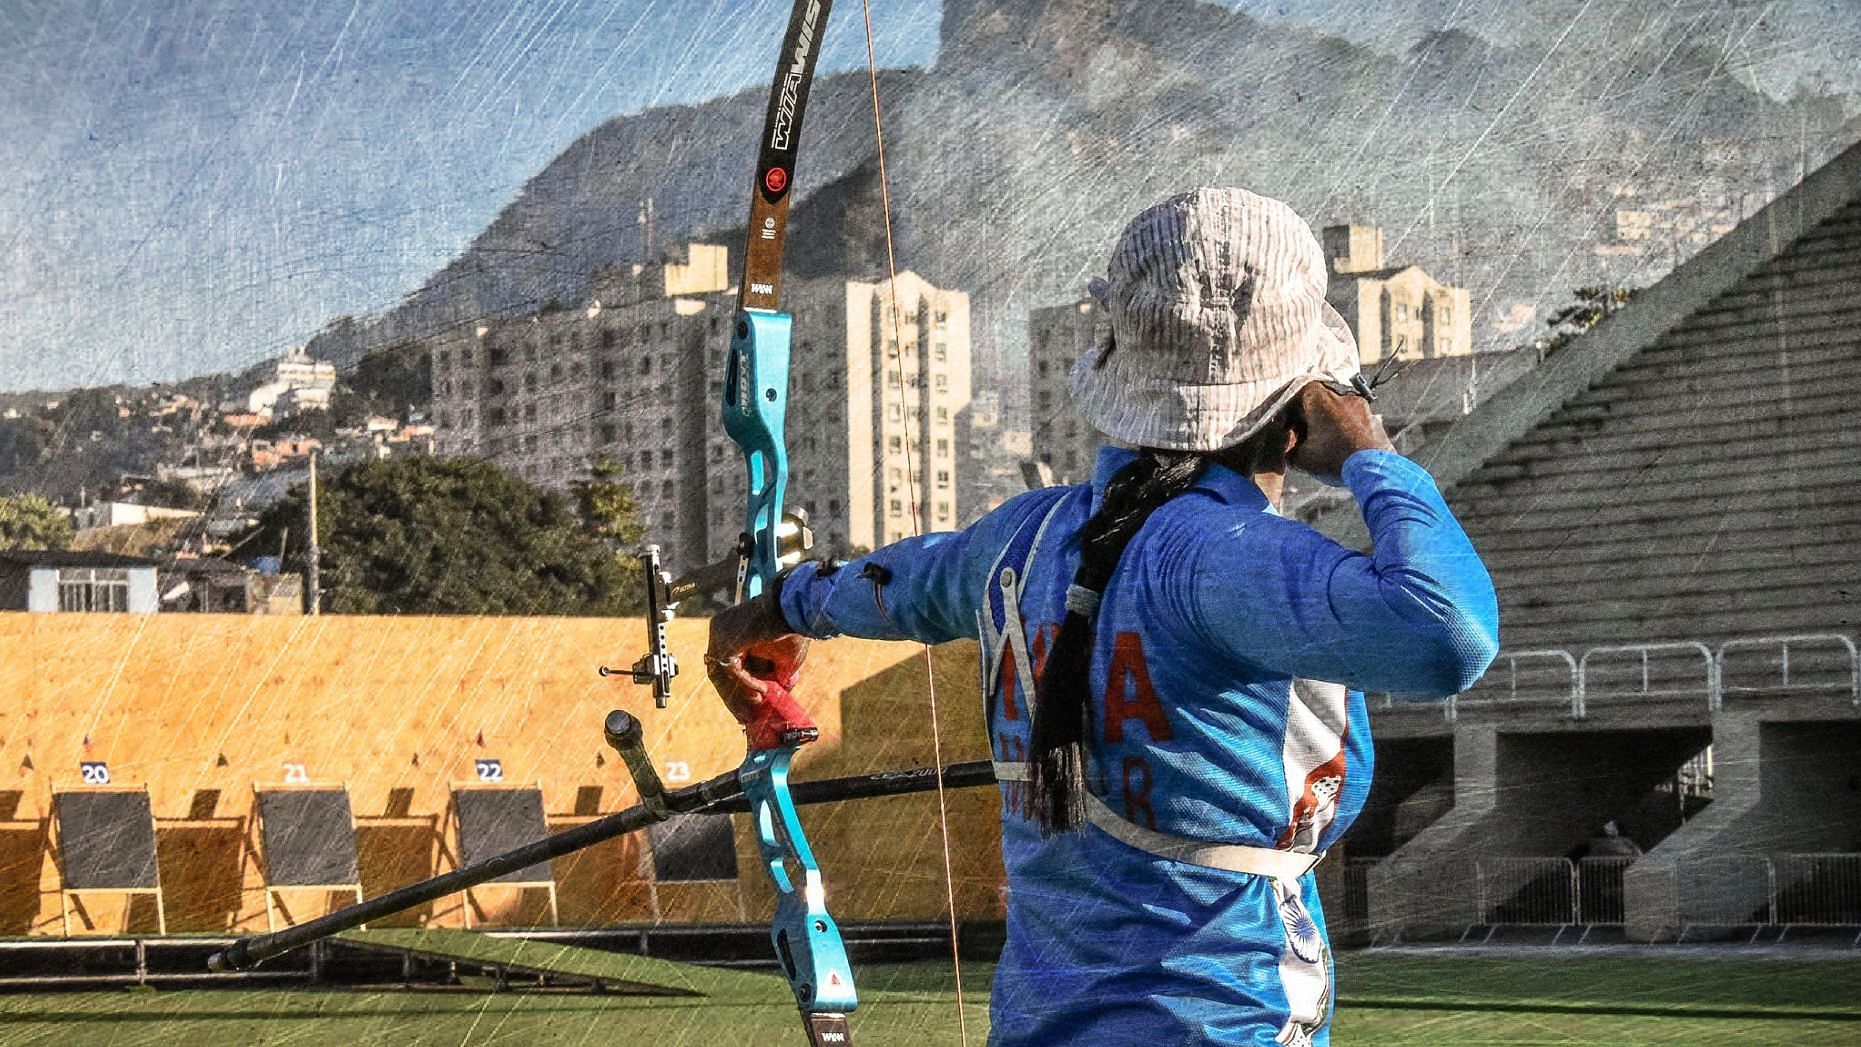 With World Archery suspending India’s national federation Indian archers have been left out in the cold.